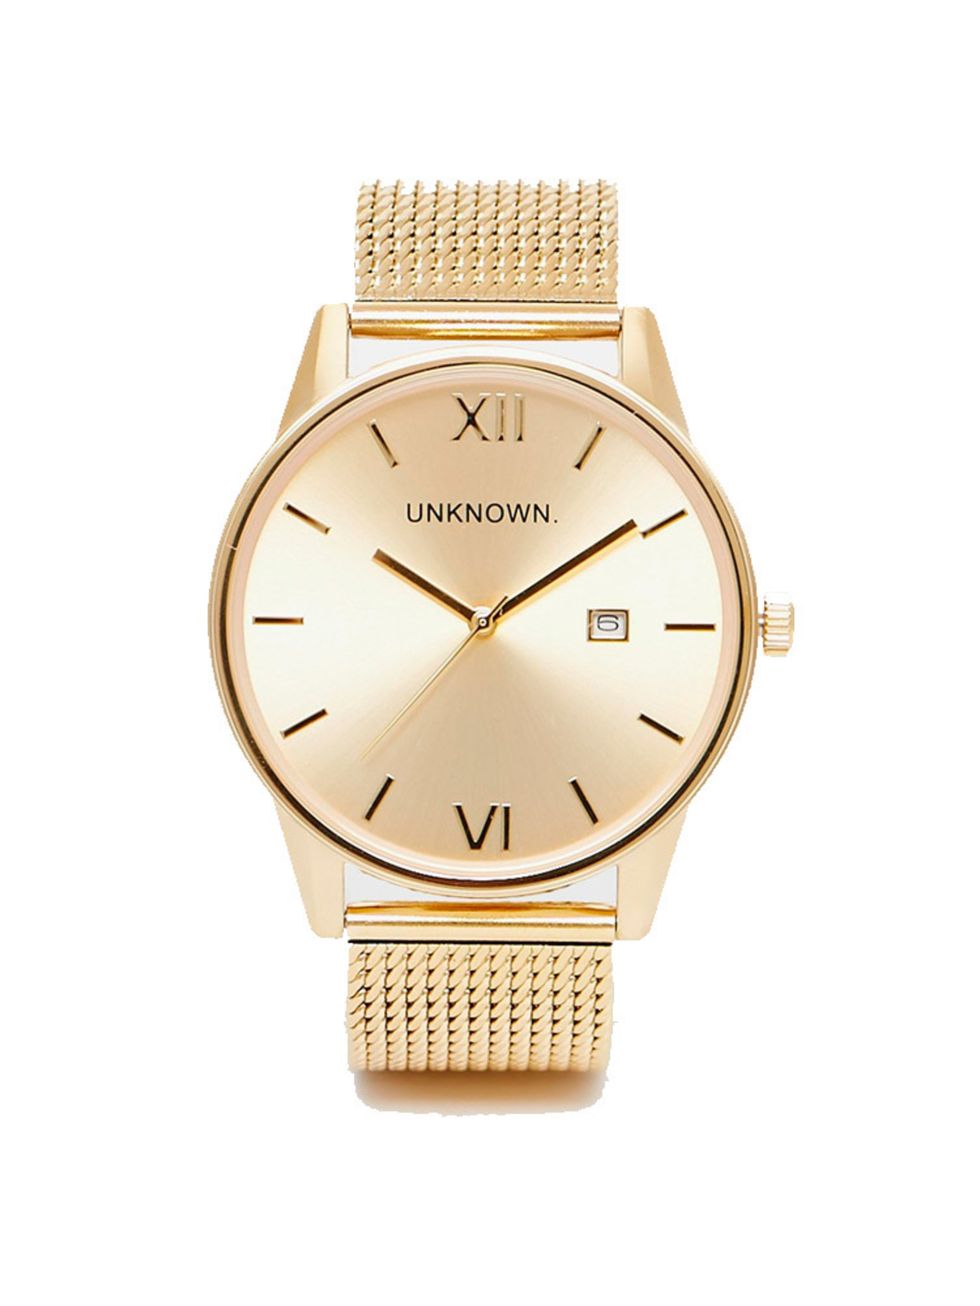 <p>UNKNOWN watch, £115 at <a href="http://www.asos.com/unknown/unknown-dandy-mesh-strap-watch/prod/pgeproduct.aspx?iid=5451941&clr=Gold&SearchQuery=gold+watch&pgesize=36&pge=0&totalstyles=154&gridsize=3&gridrow=3&gridcolumn=3" target="_blank">asos.com</a>